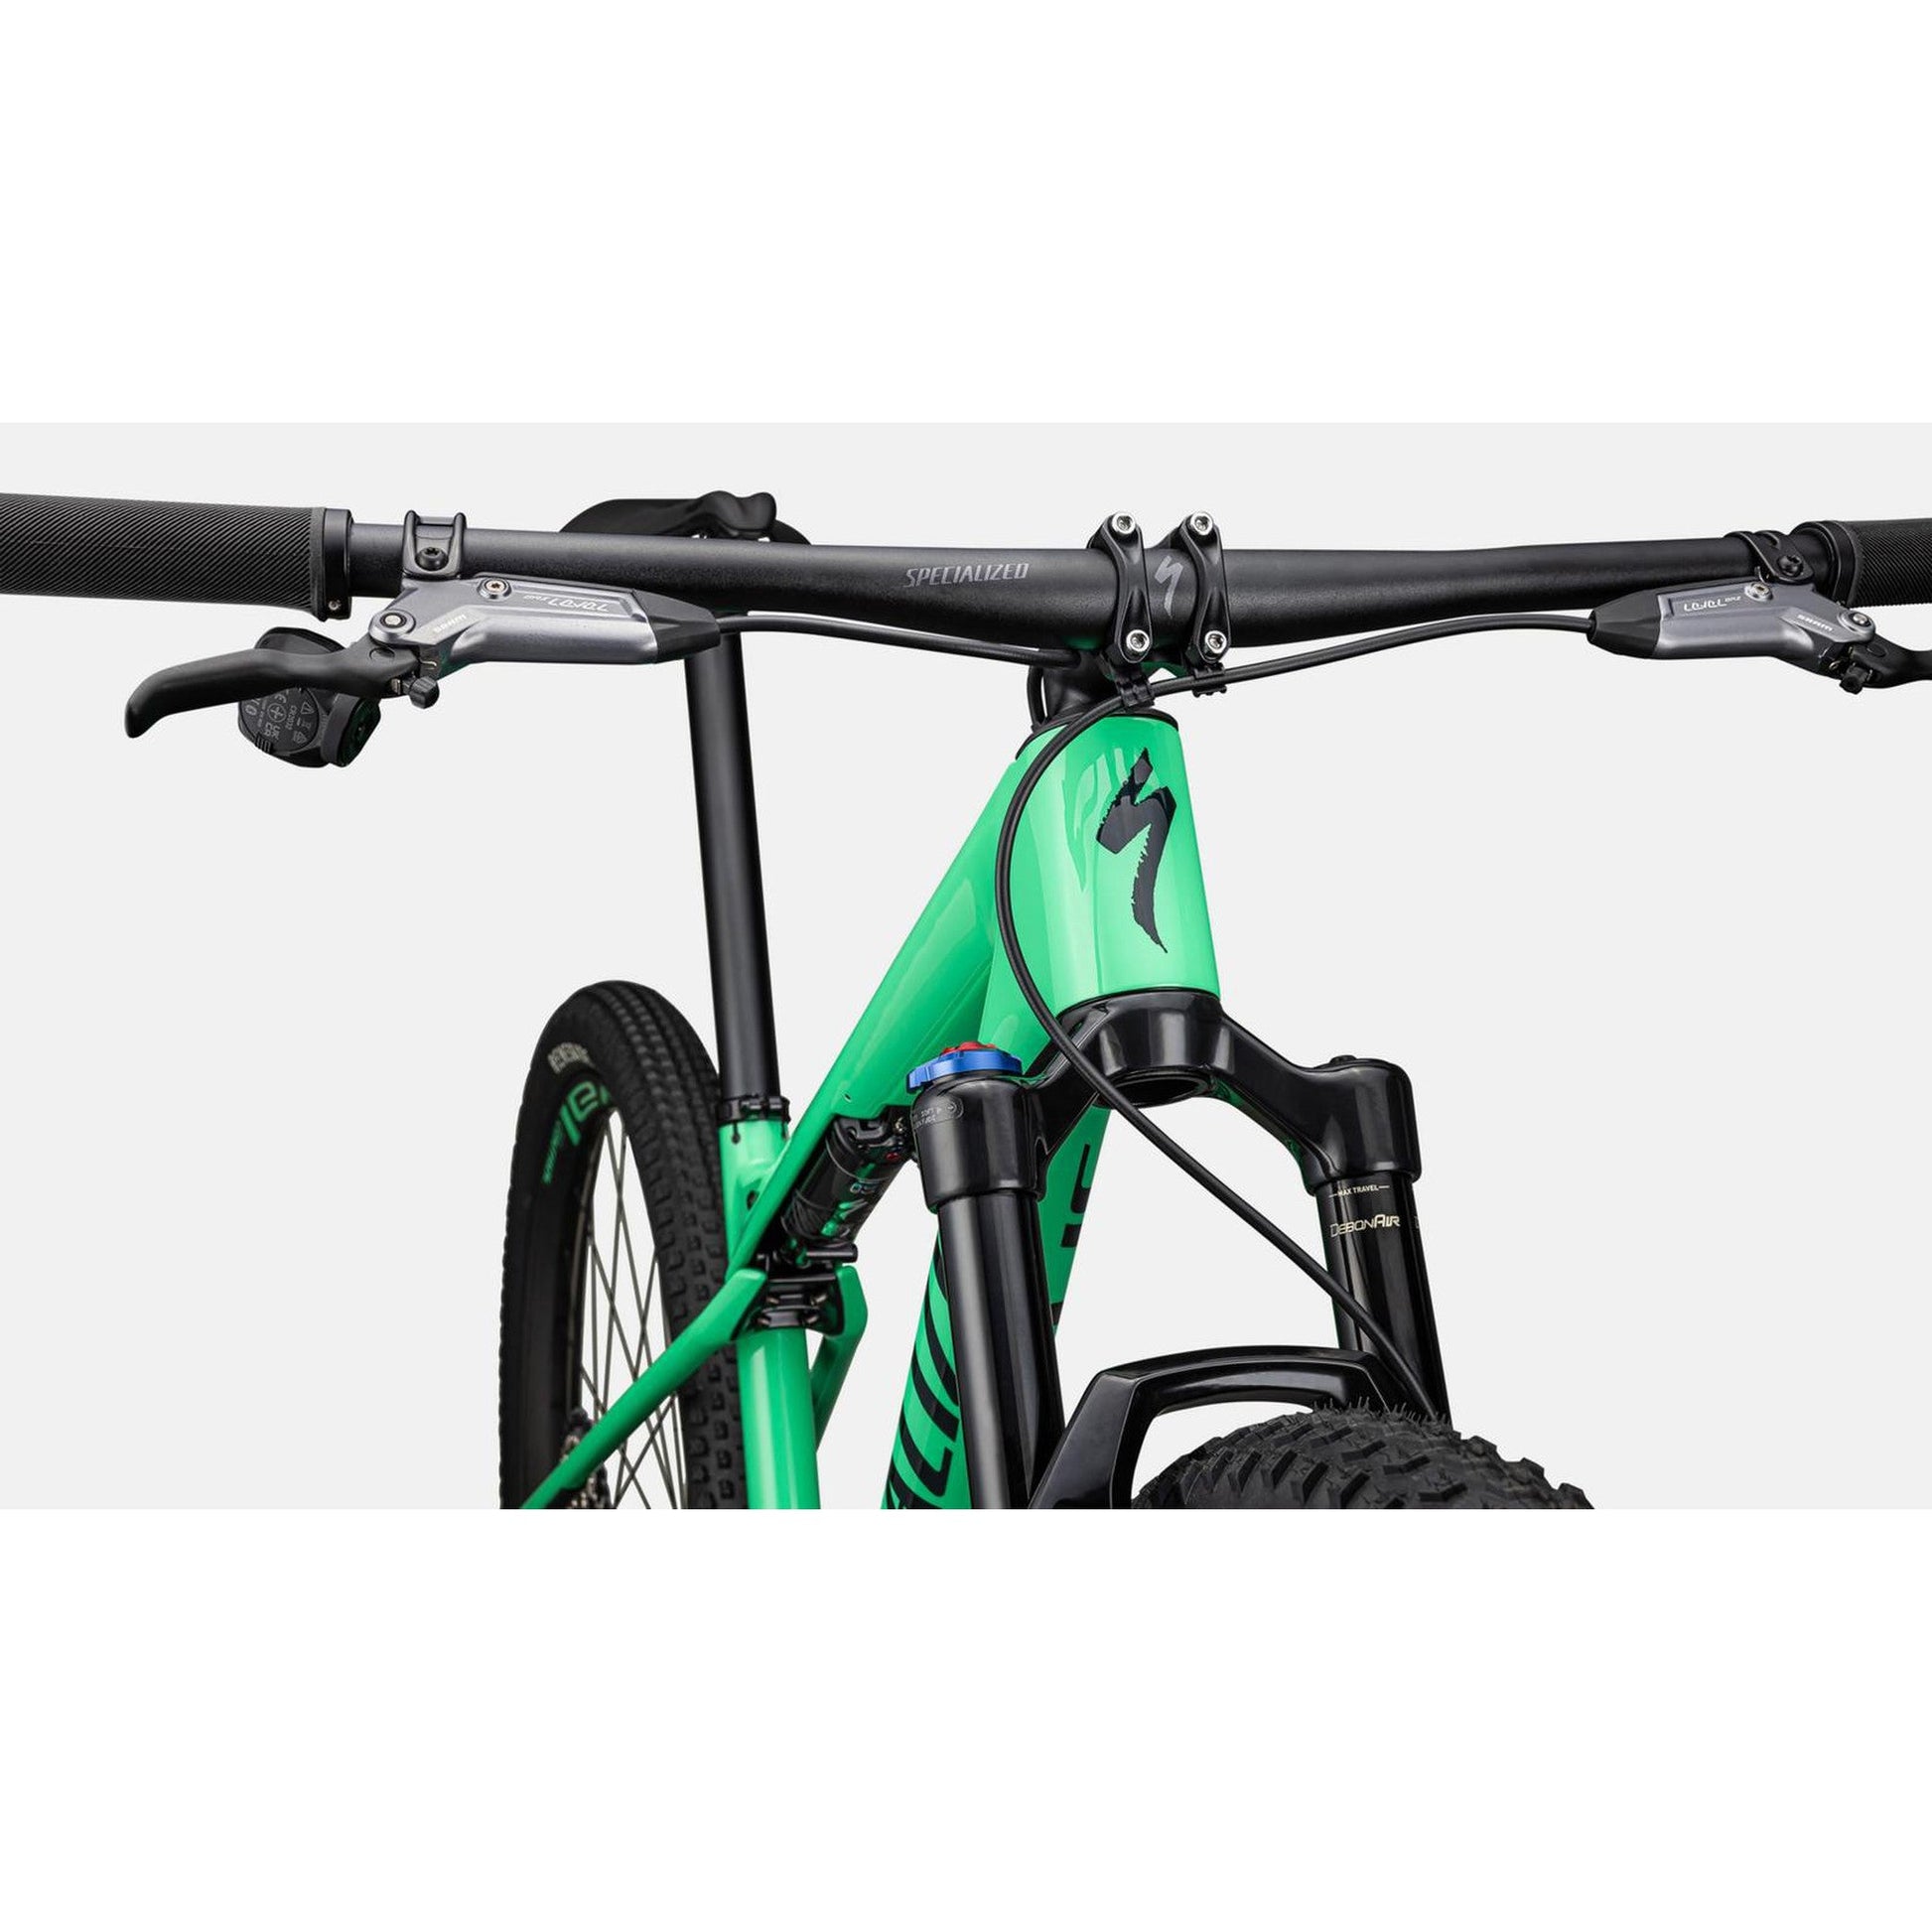 Epic World Cup Expert | Complete Cyclist - THINK FASTEST: The Epic World Cup is the fastest XC race bike in the world on smooth to moderately technical courses thanks to its unmatched combination of efficiency, control, and light-weight.